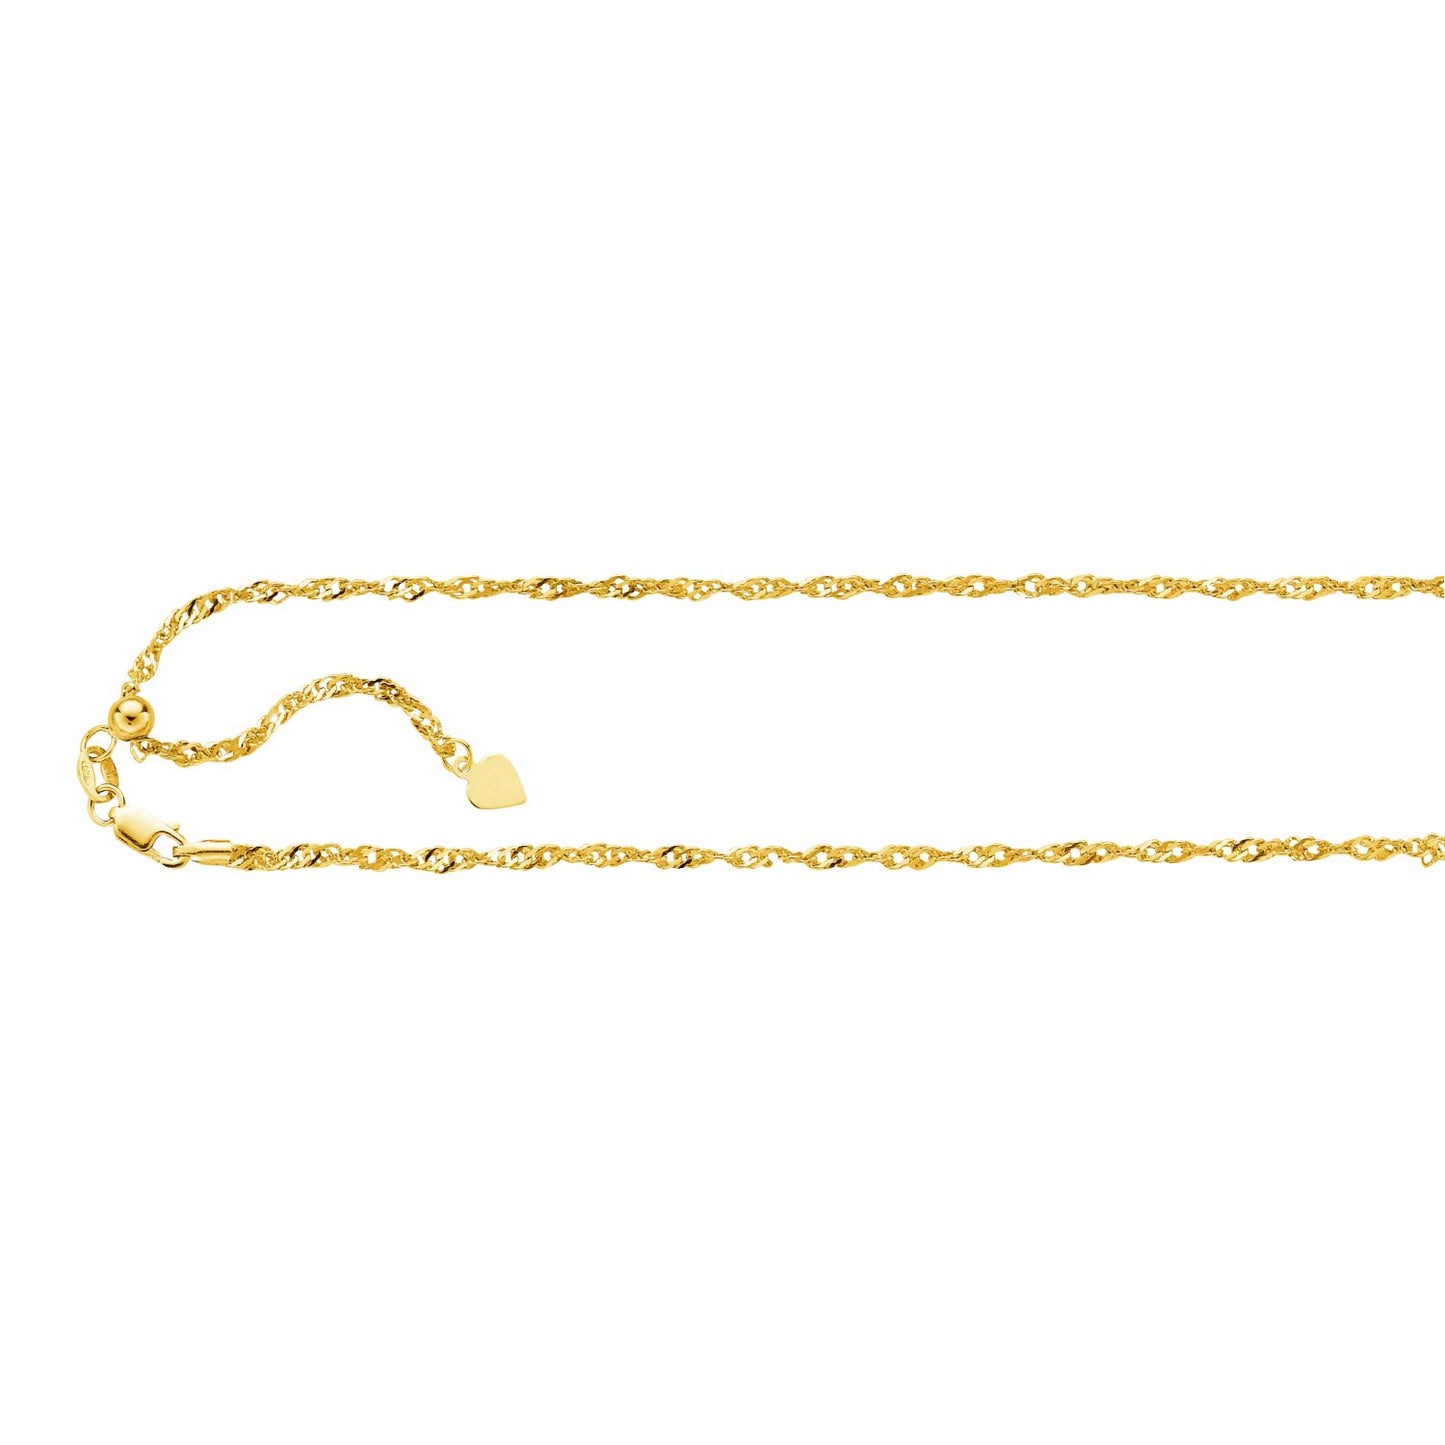 14K Solid Yellow Gold Adjustable Singapore Chain Necklace 1.1mm thick 22 Inches